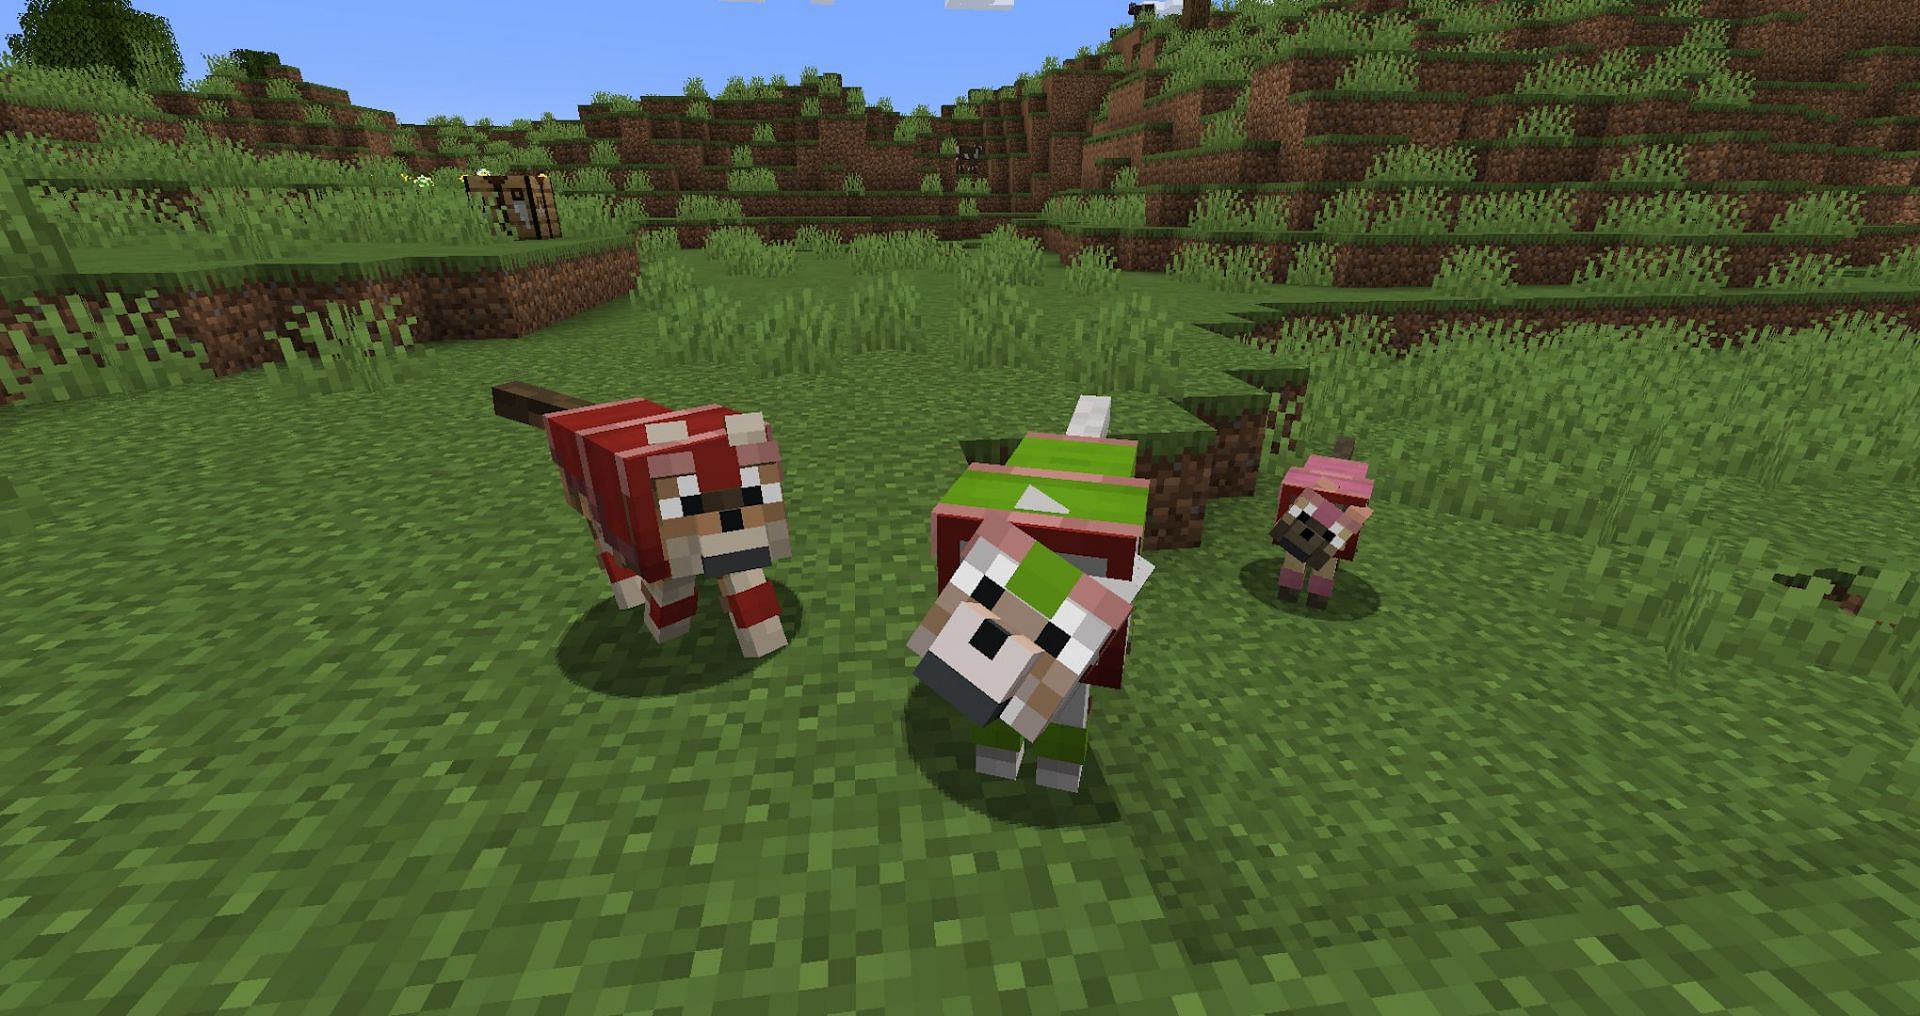 A group of tamed wolves with dyed armor. (Image via Mojang)